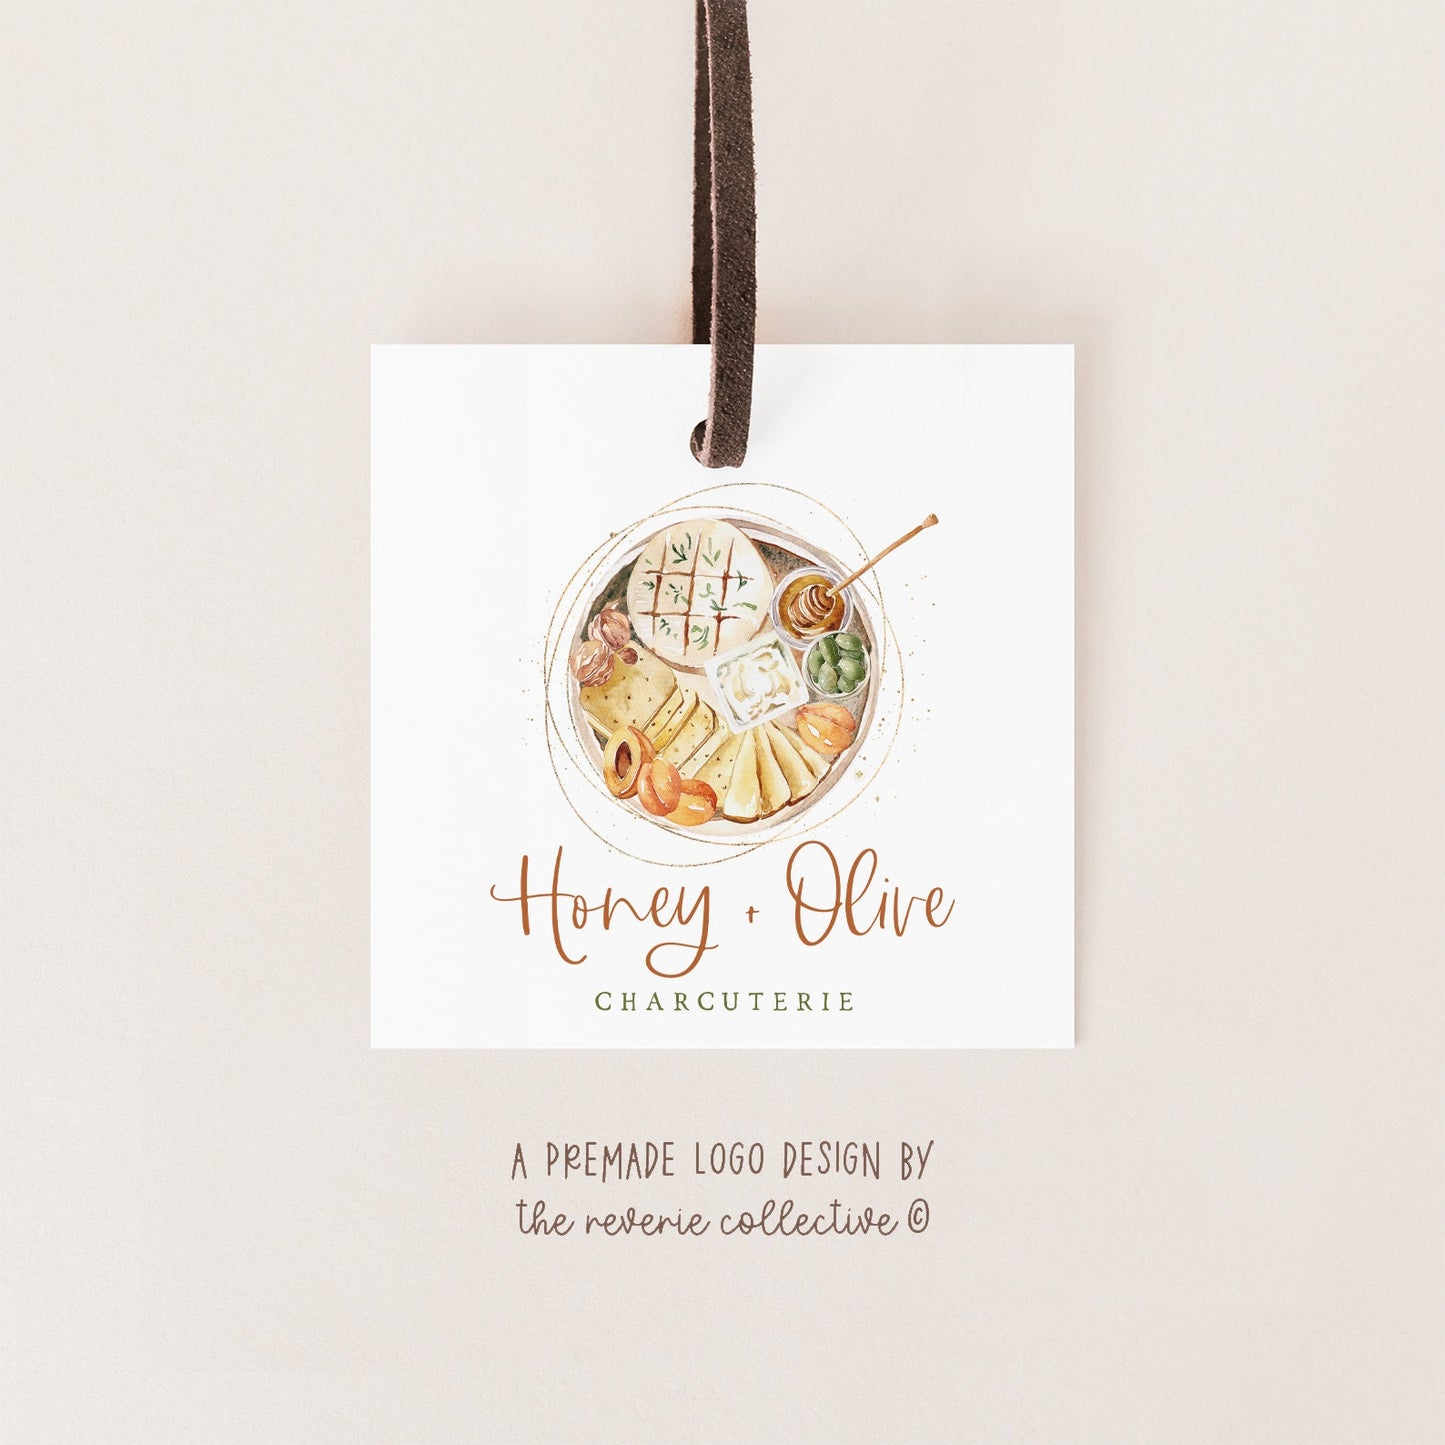 Honey + Olive | Premade Logo Design | Charcuterie, Cheese Board, Brie, Herb